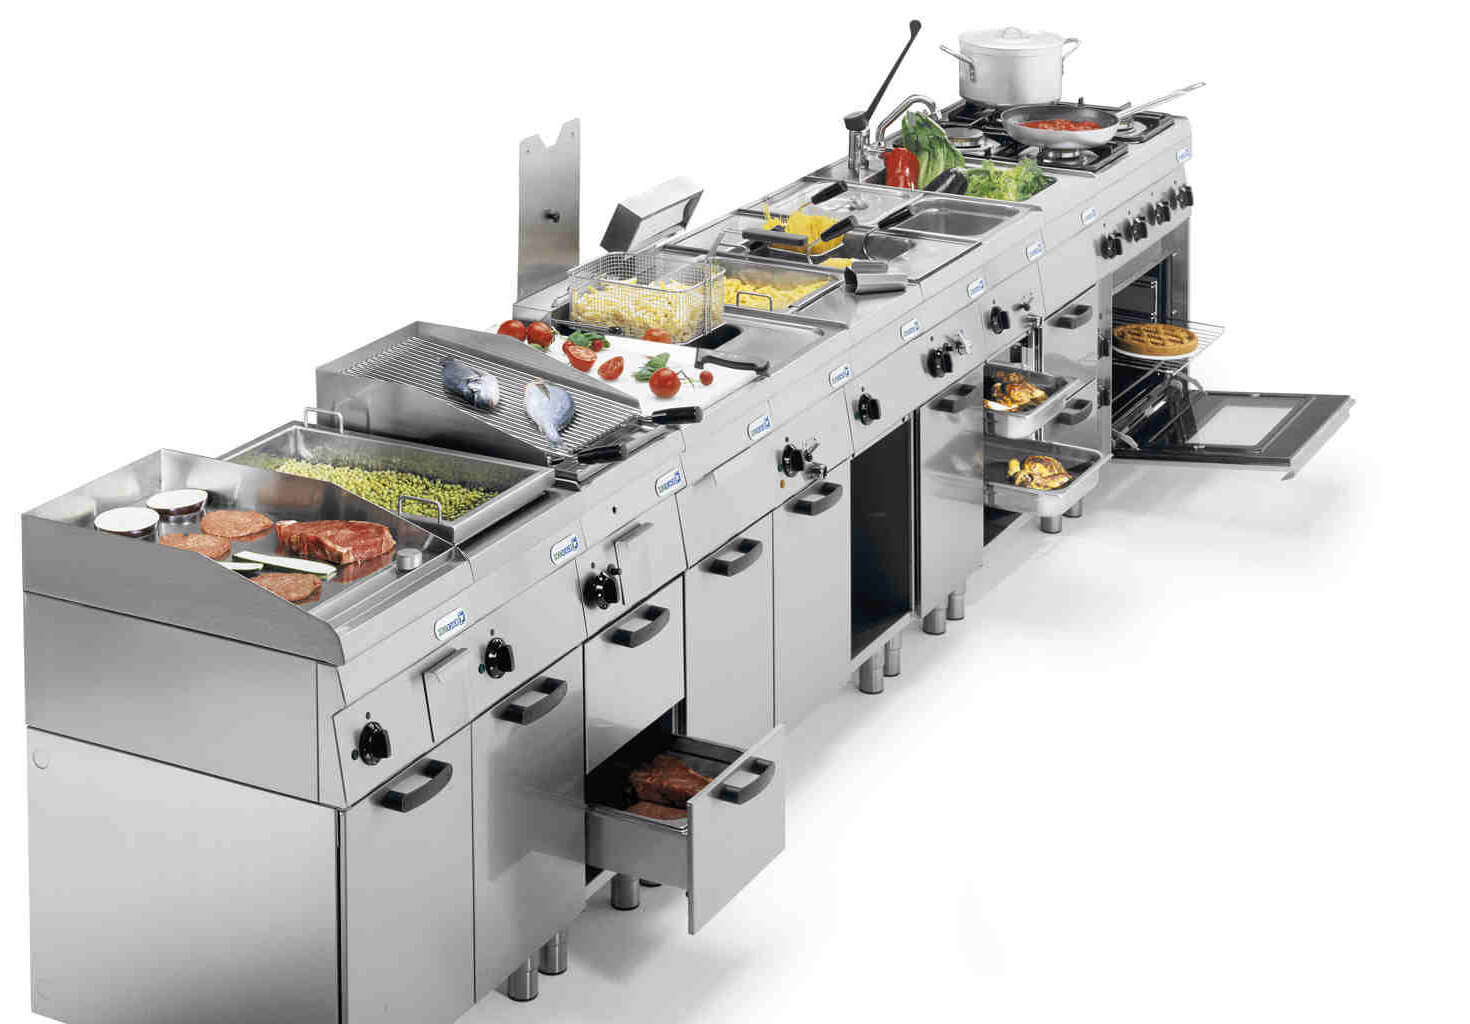  Kitchen  Equipment  necessary for your Commercial Kitchen  